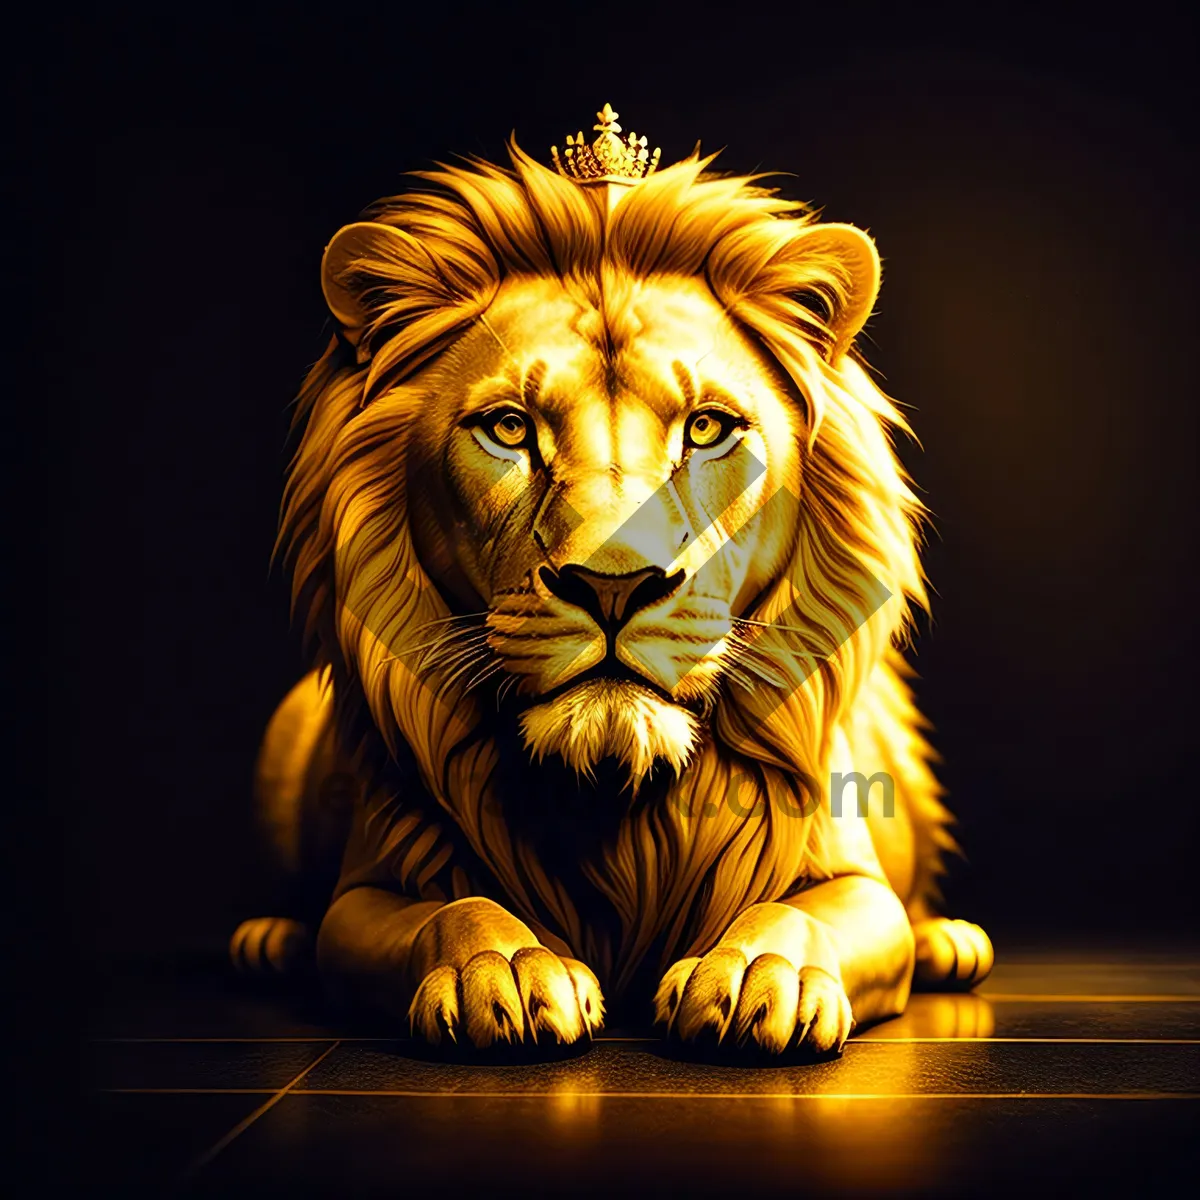 Picture of Majestic Lion: The Fierce King of the Wilderness